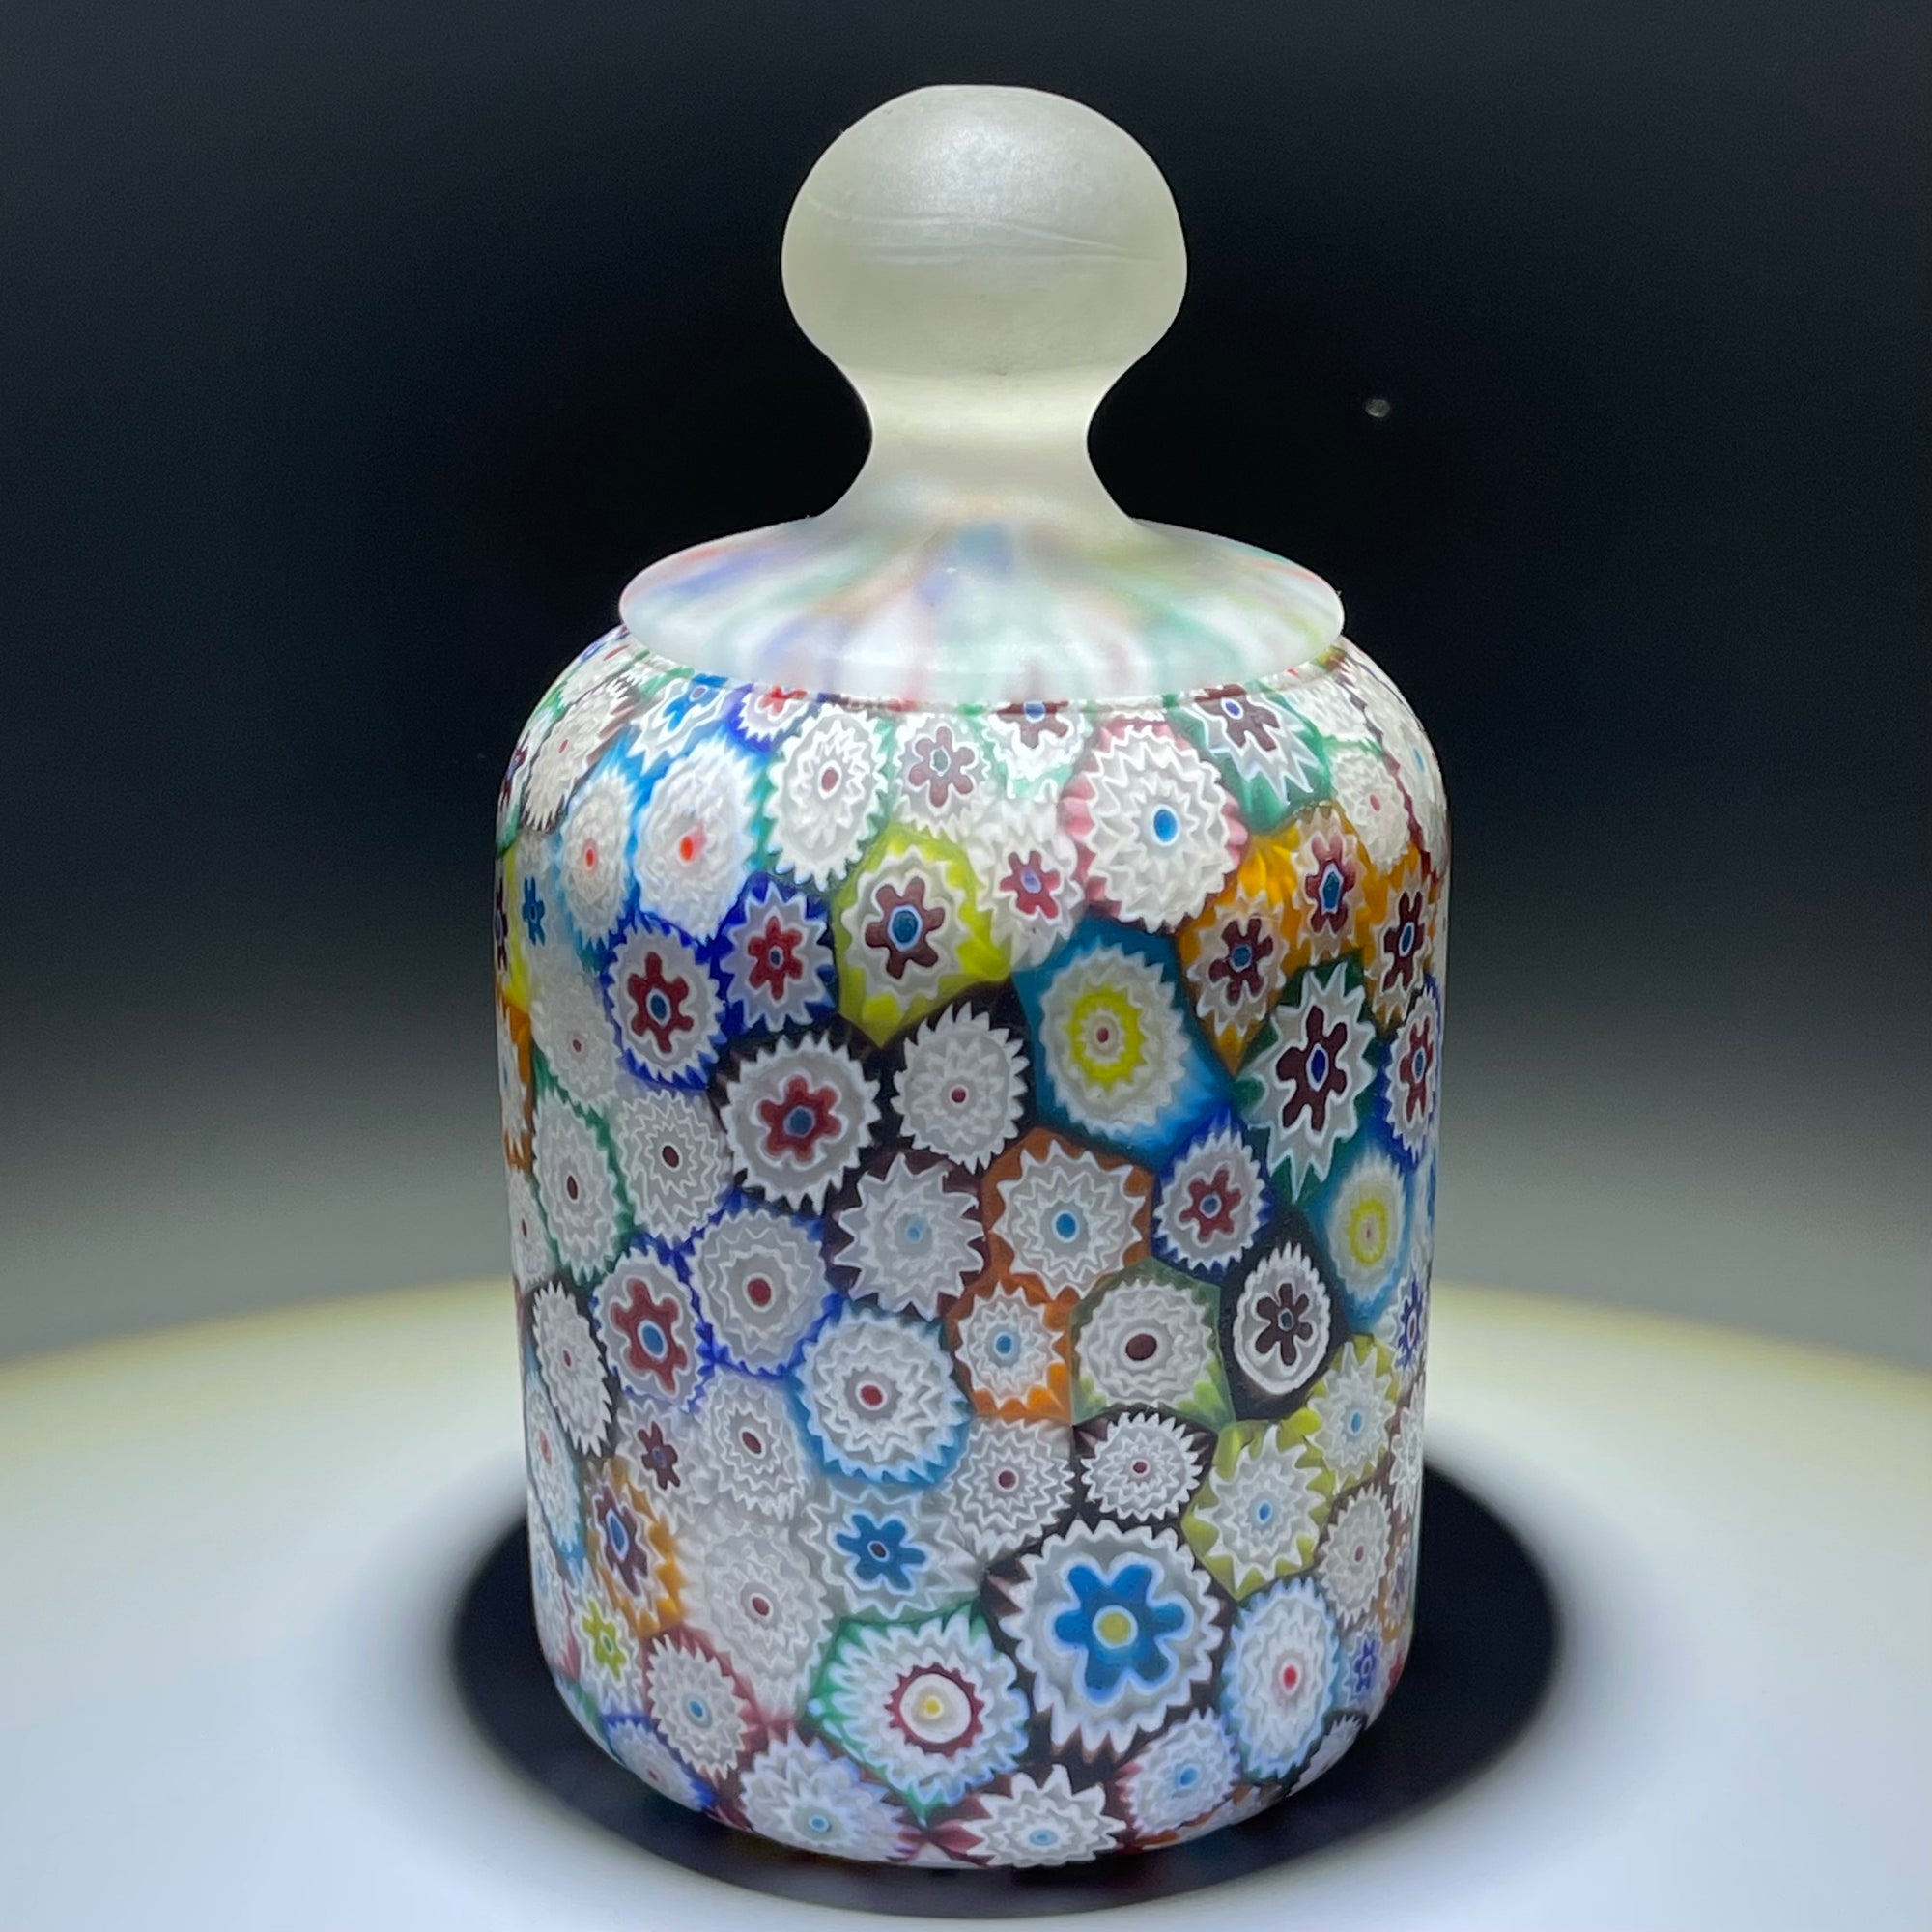 Vintage Murano Fratelli Toso Hollow Blown Millefiori Glass Art Paperweight with Applied Knob